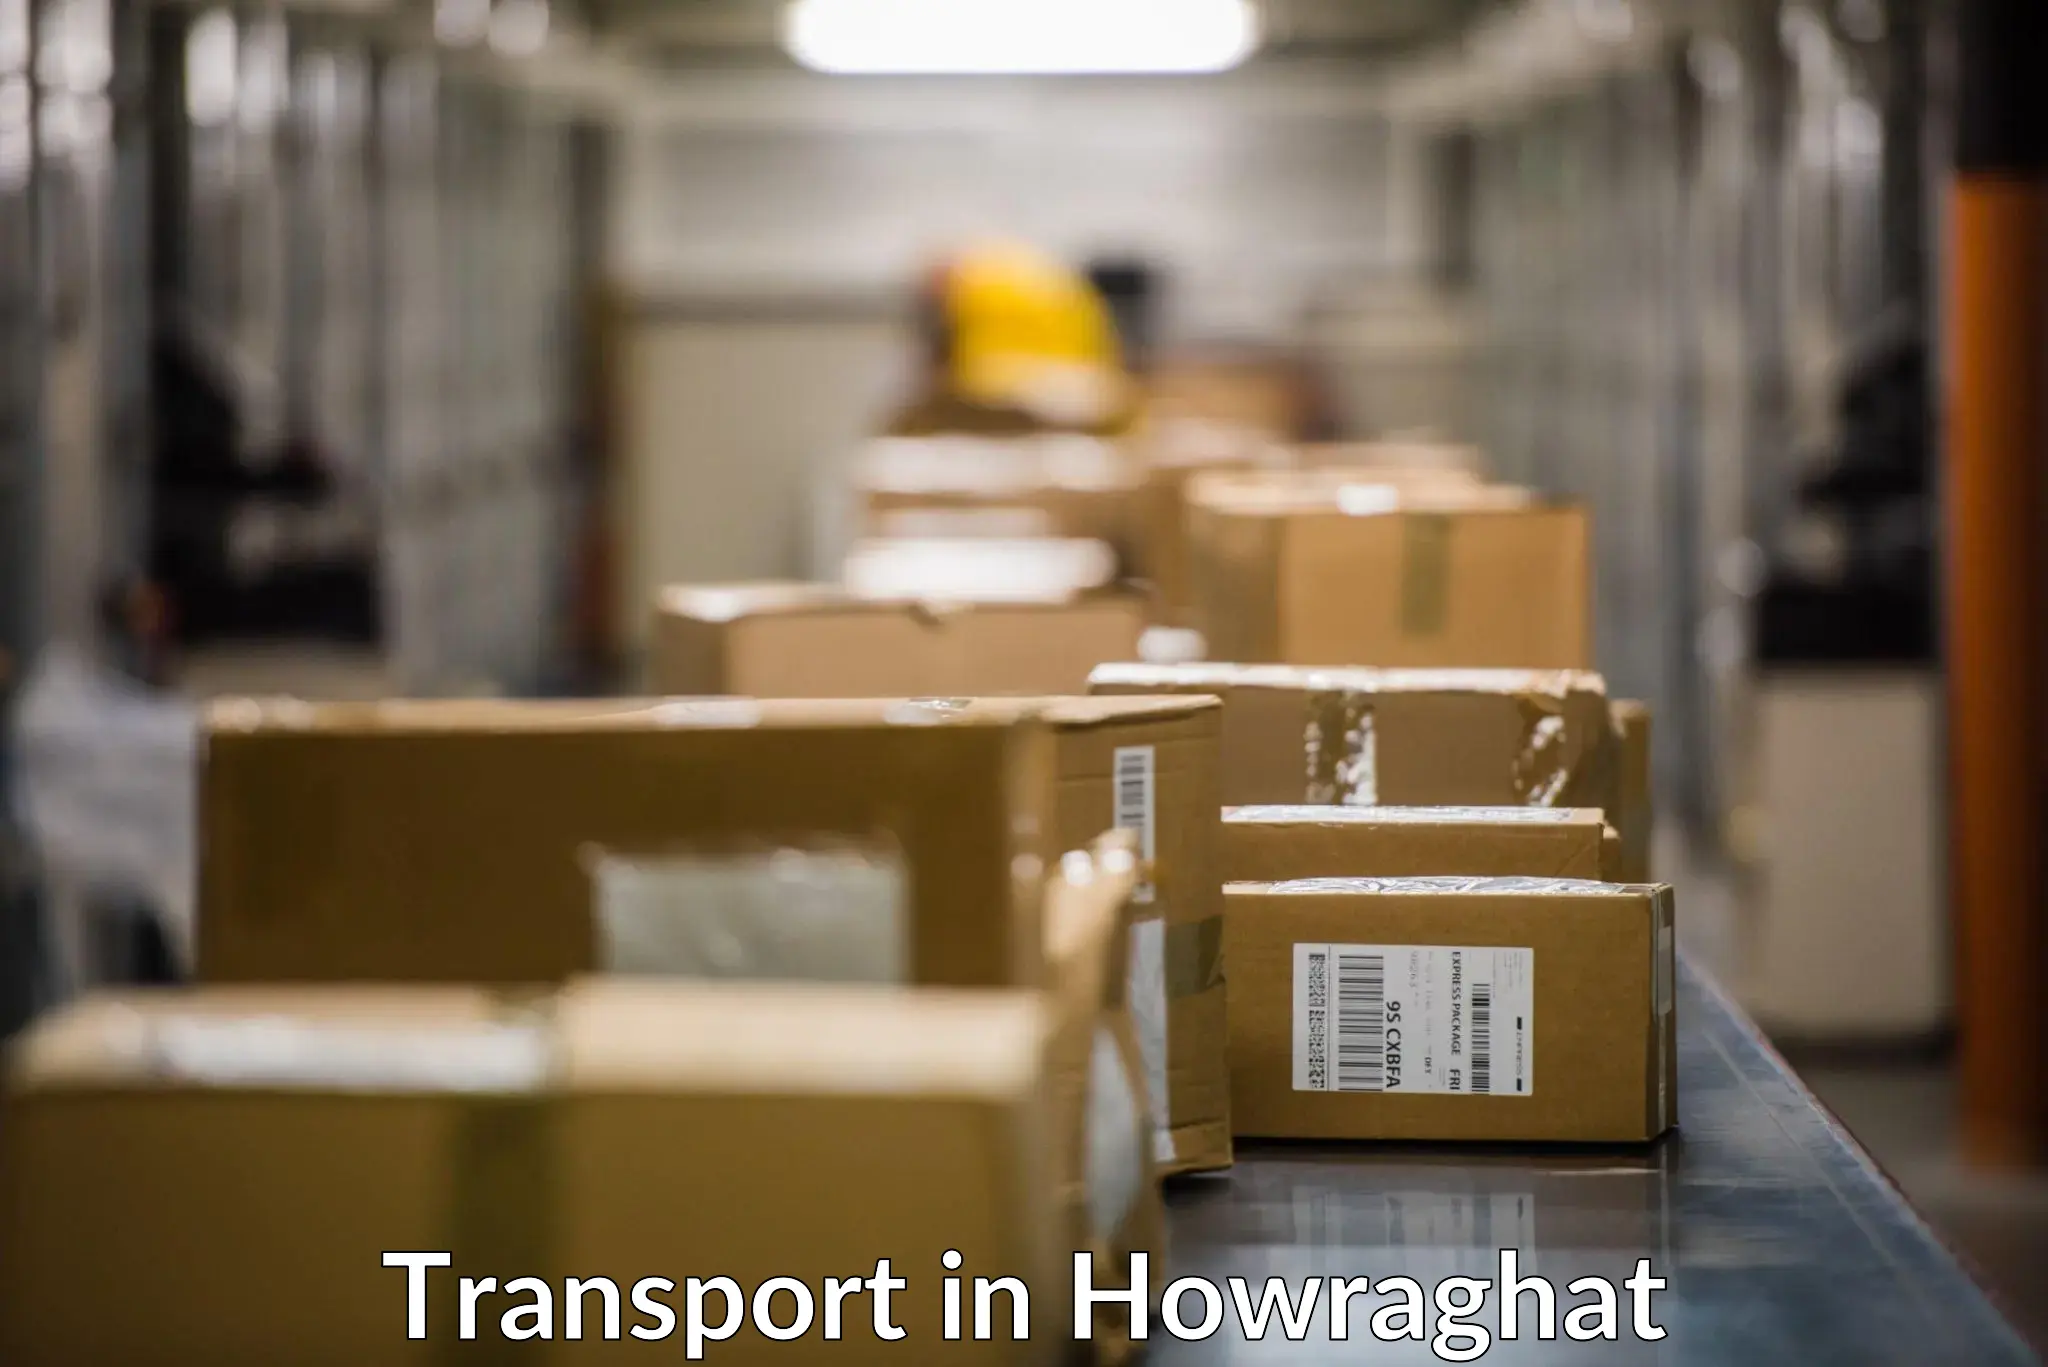 Vehicle transport services in Howraghat